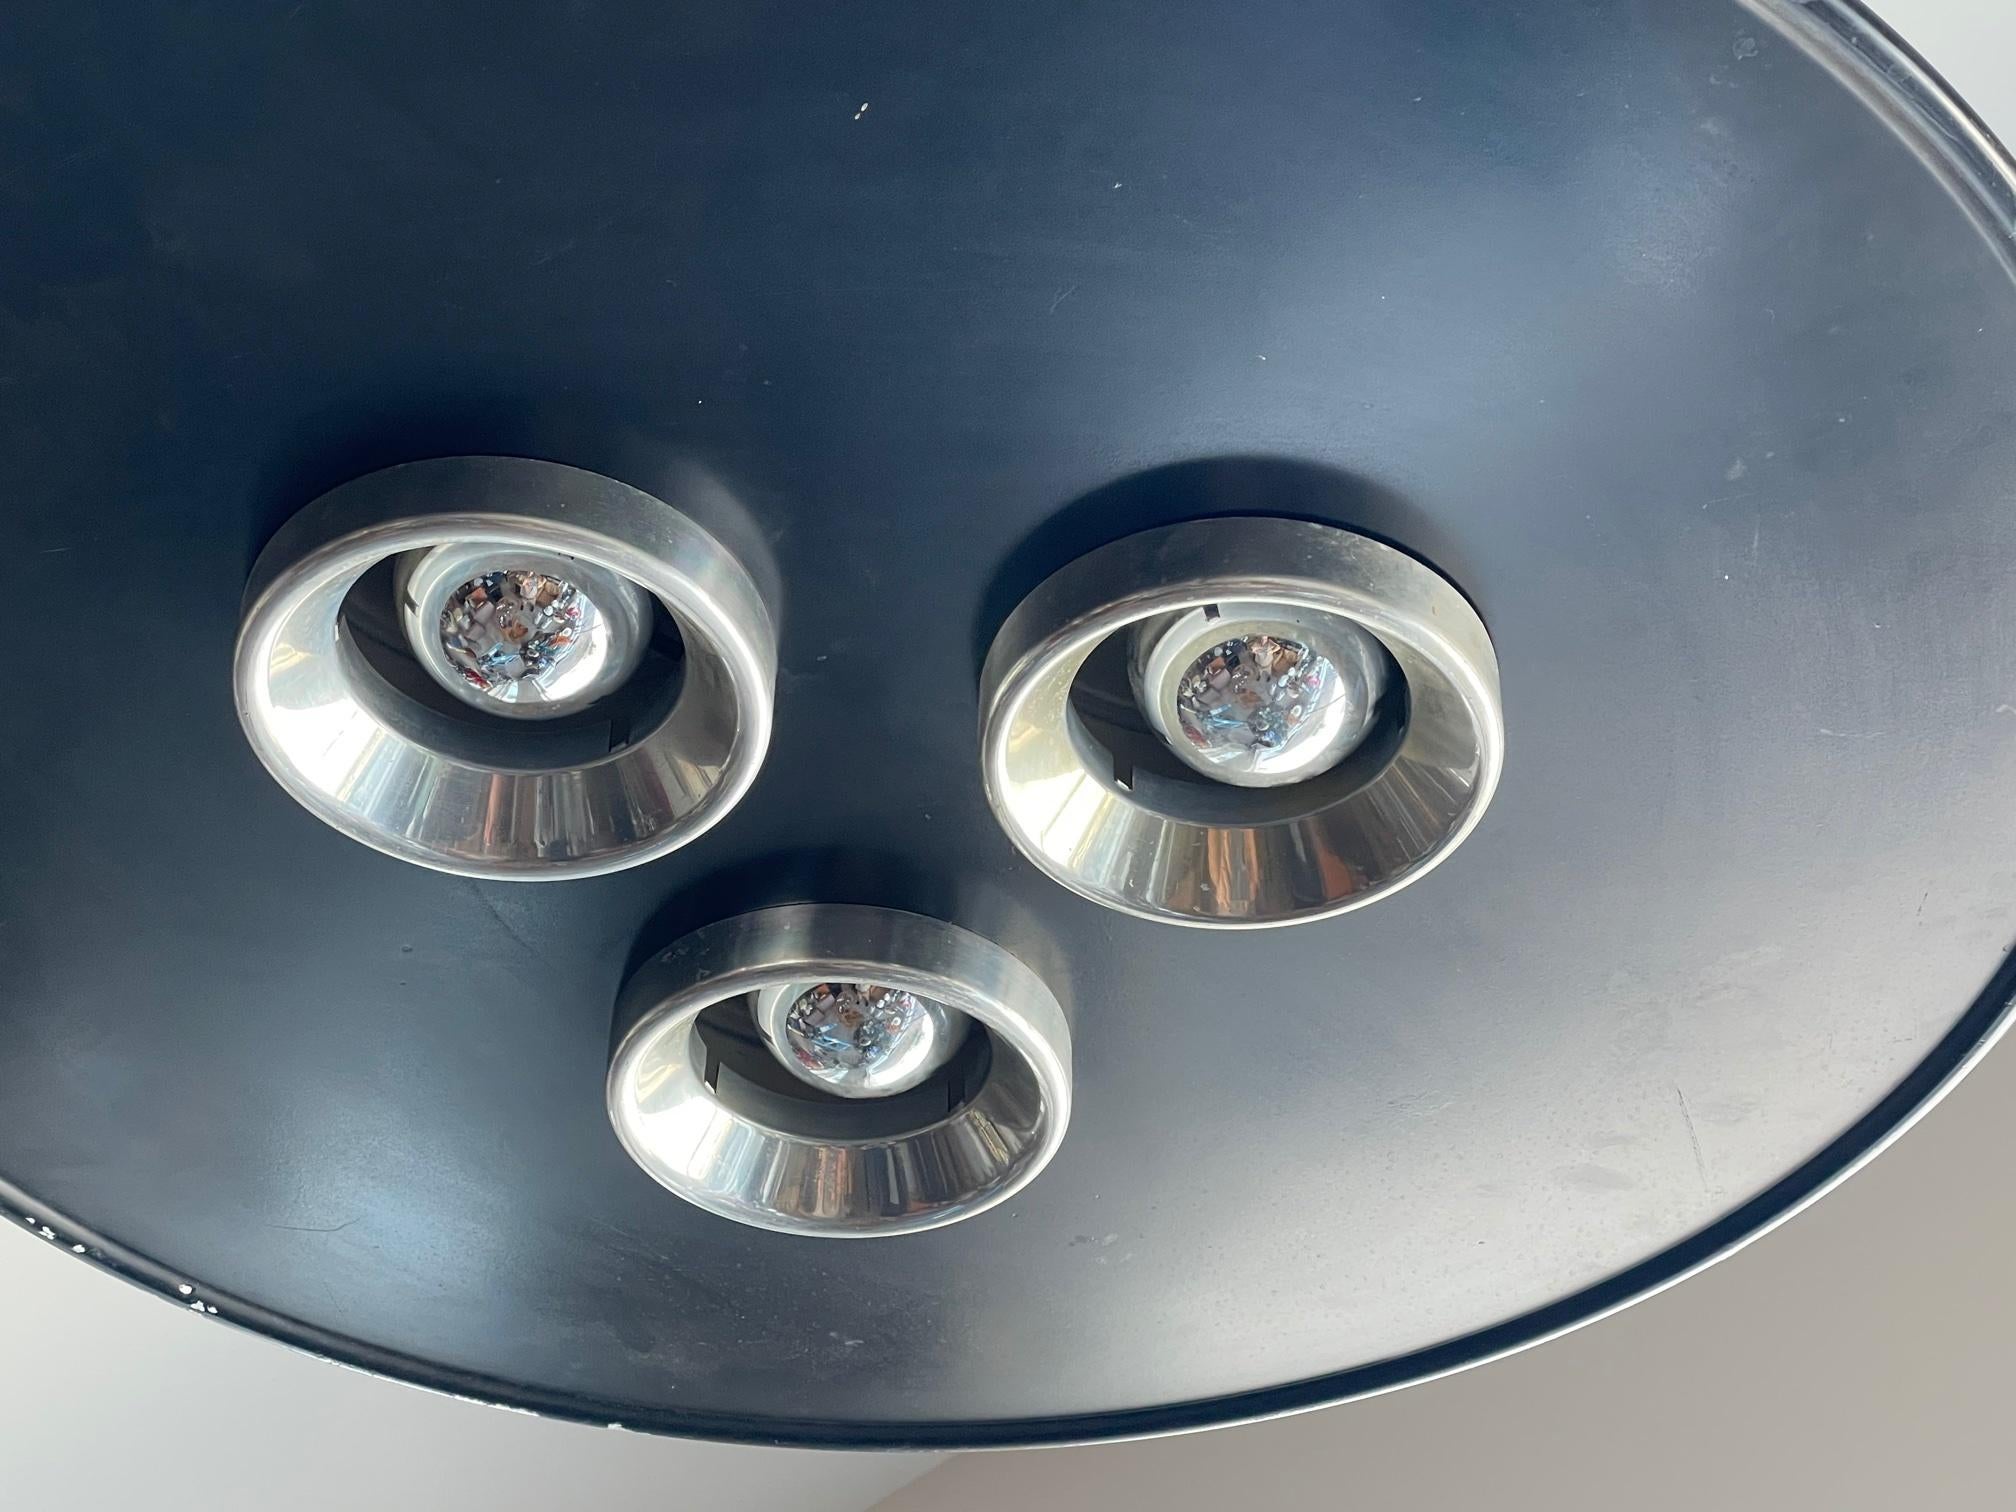 An unusual chandelier from the 1970's by Ettore Sottsass, produced by Stilnovo, Italy. Futuristic design with three aluminum reflectors and matching domes on top.